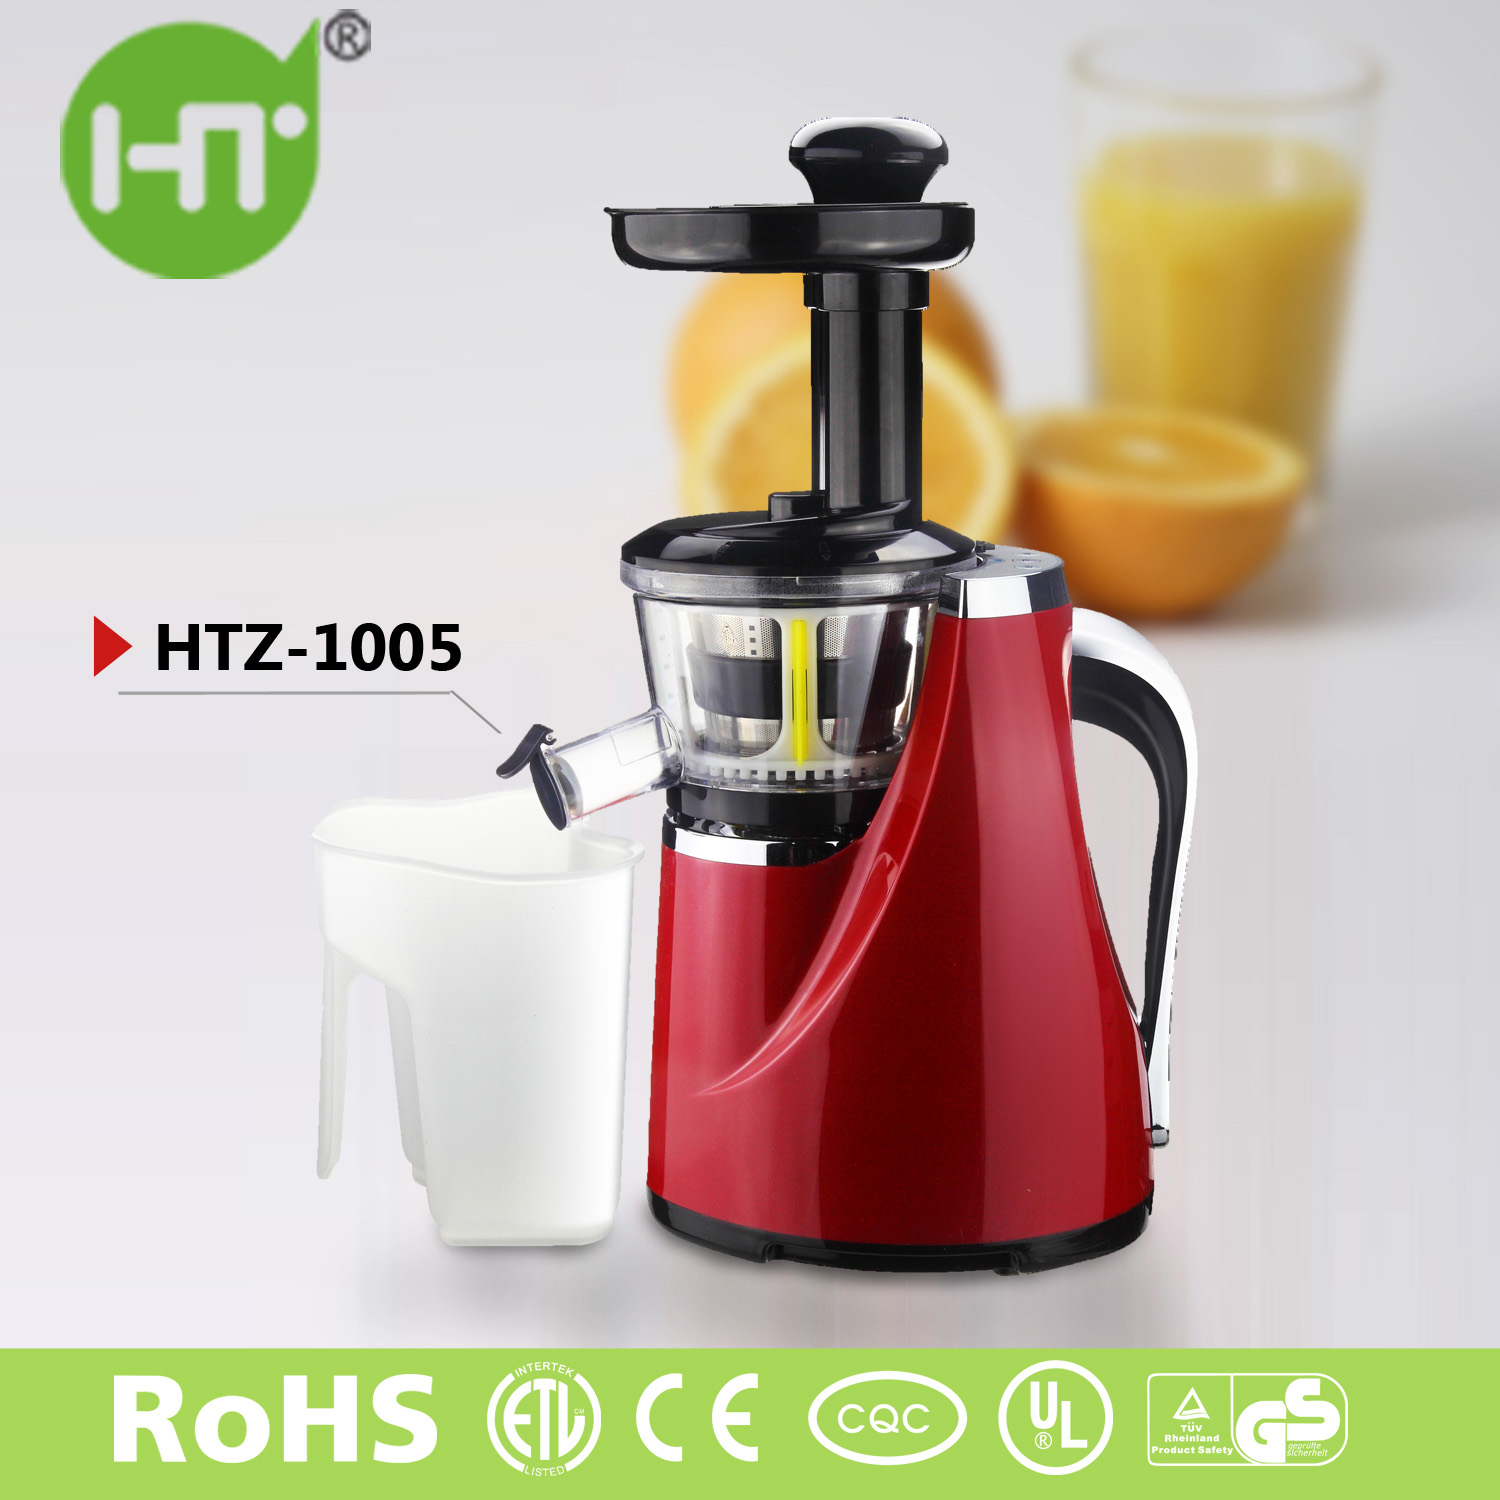 HTZ-1005 2015 New Latest Low Power Consumption Stainless Steel High Efficiency Electric Slow Juicer